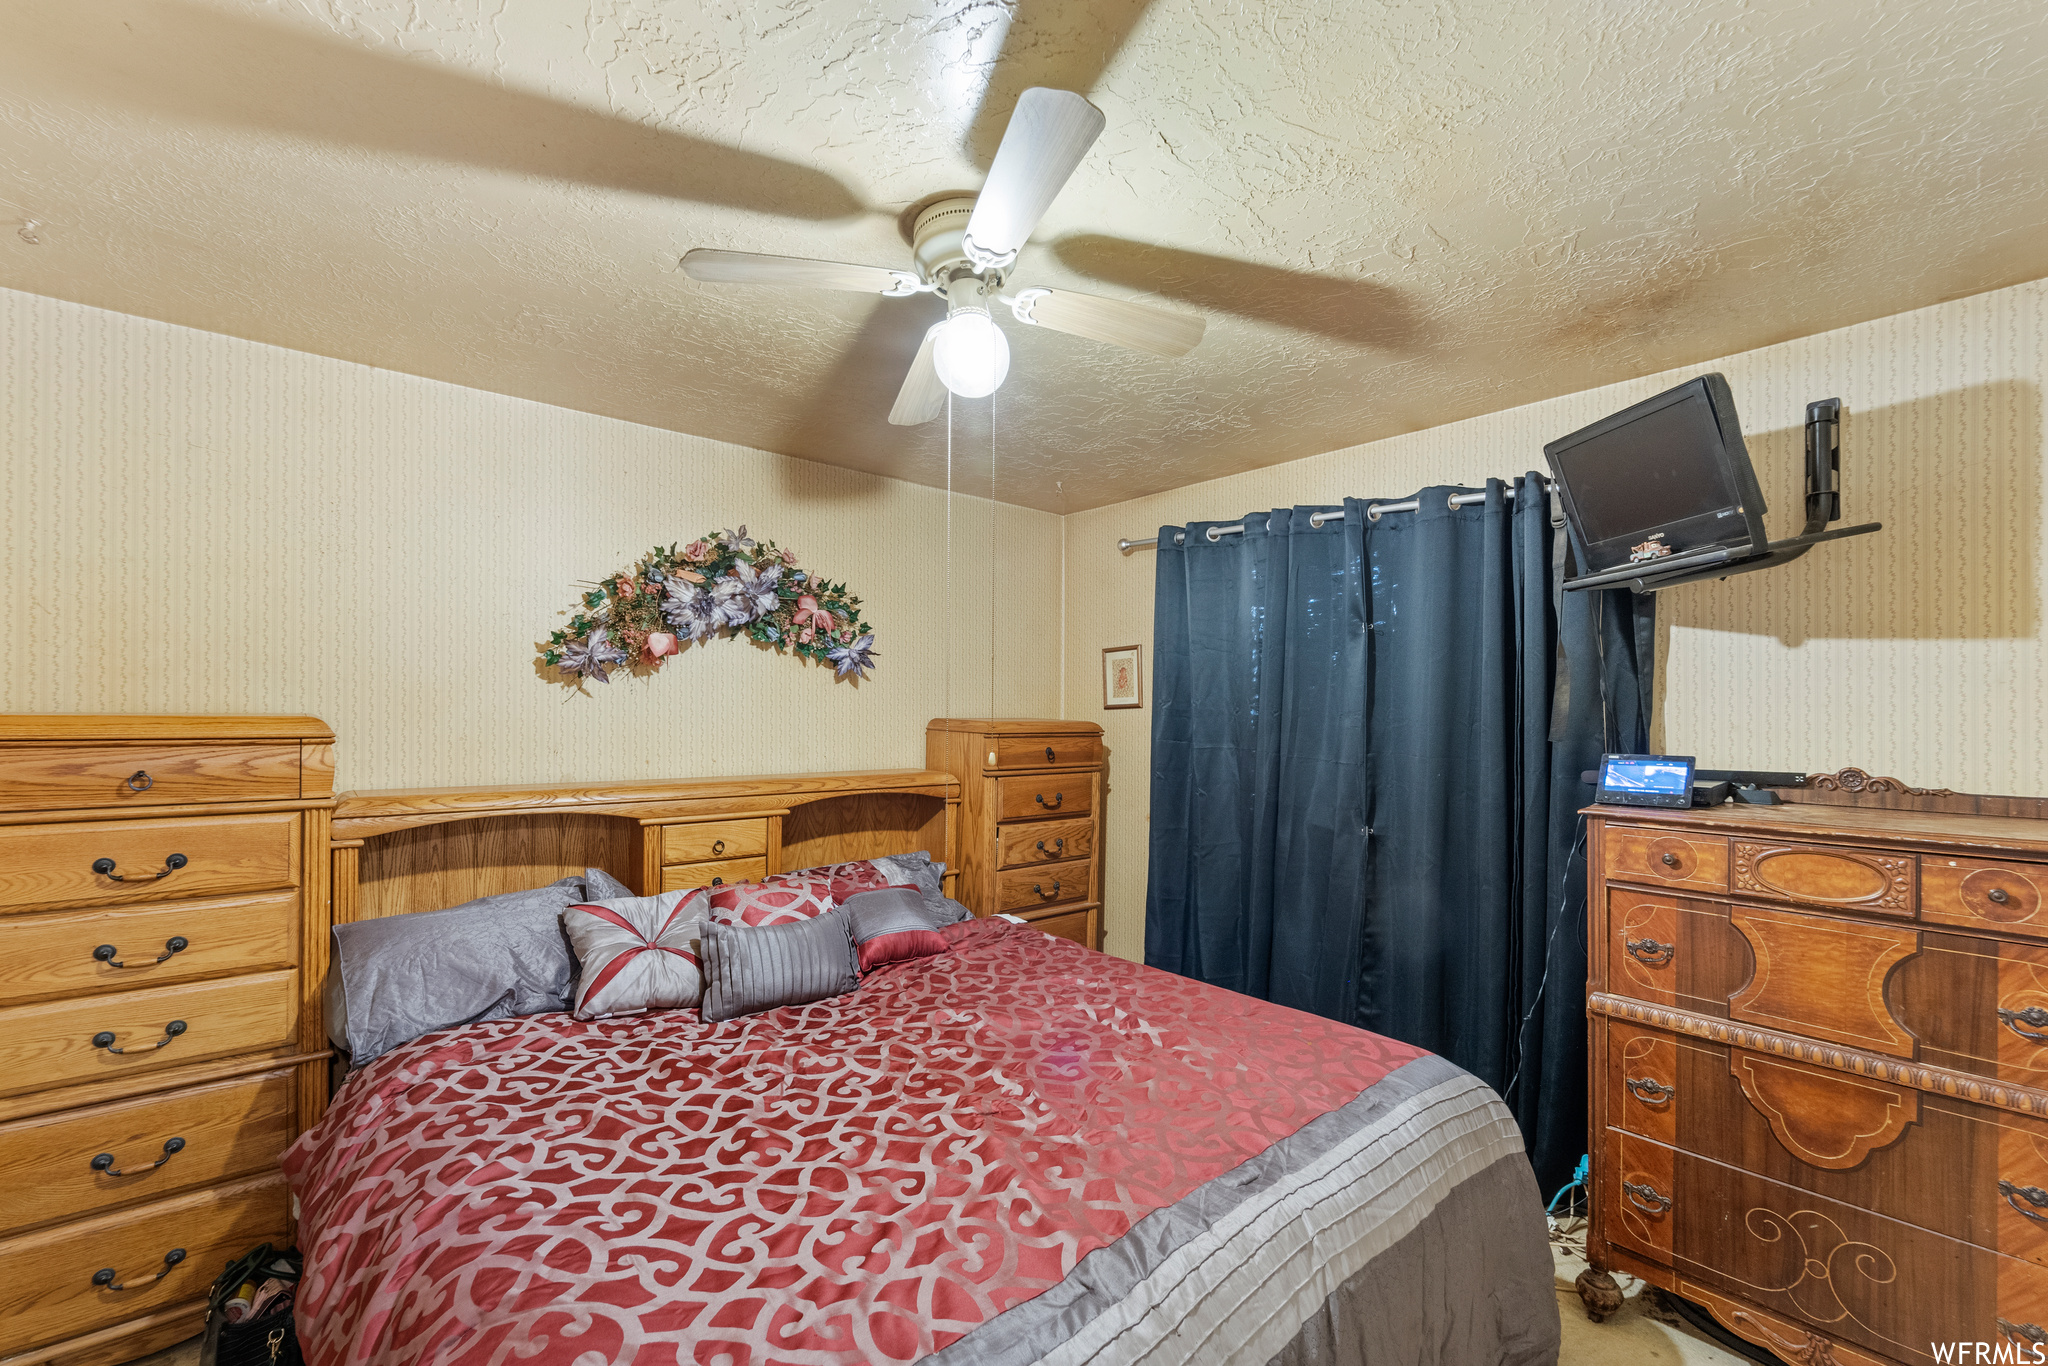 Bedroom with ceiling fan and a textured ceiling